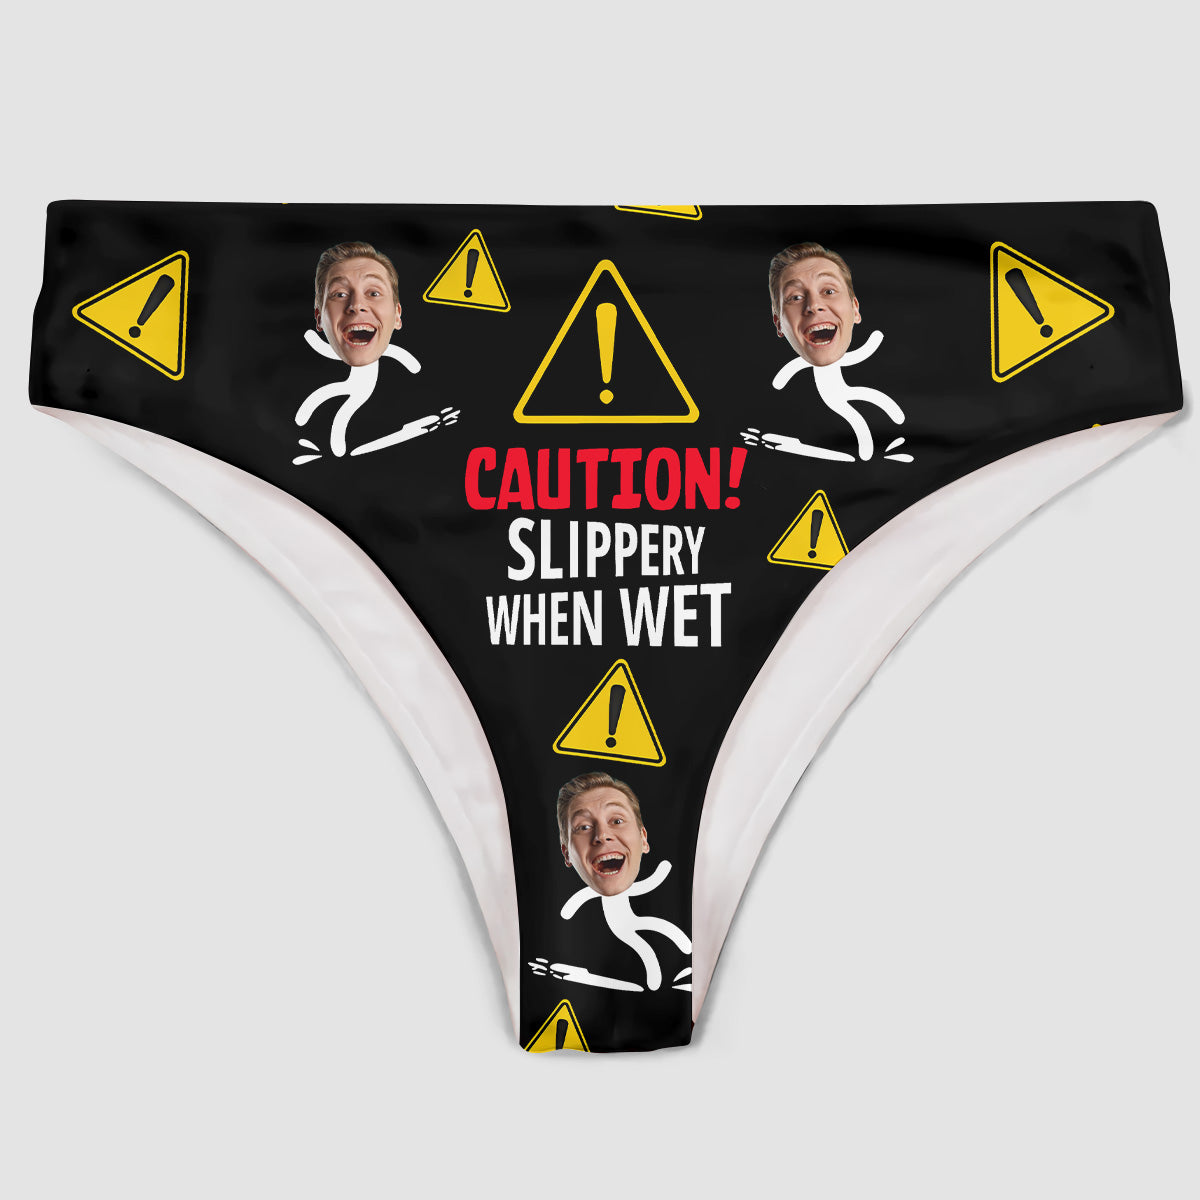 Caution! Slippery When Wet - Personalized Custom Women's Briefs - Gift For Couple, Girlfriend, Wife